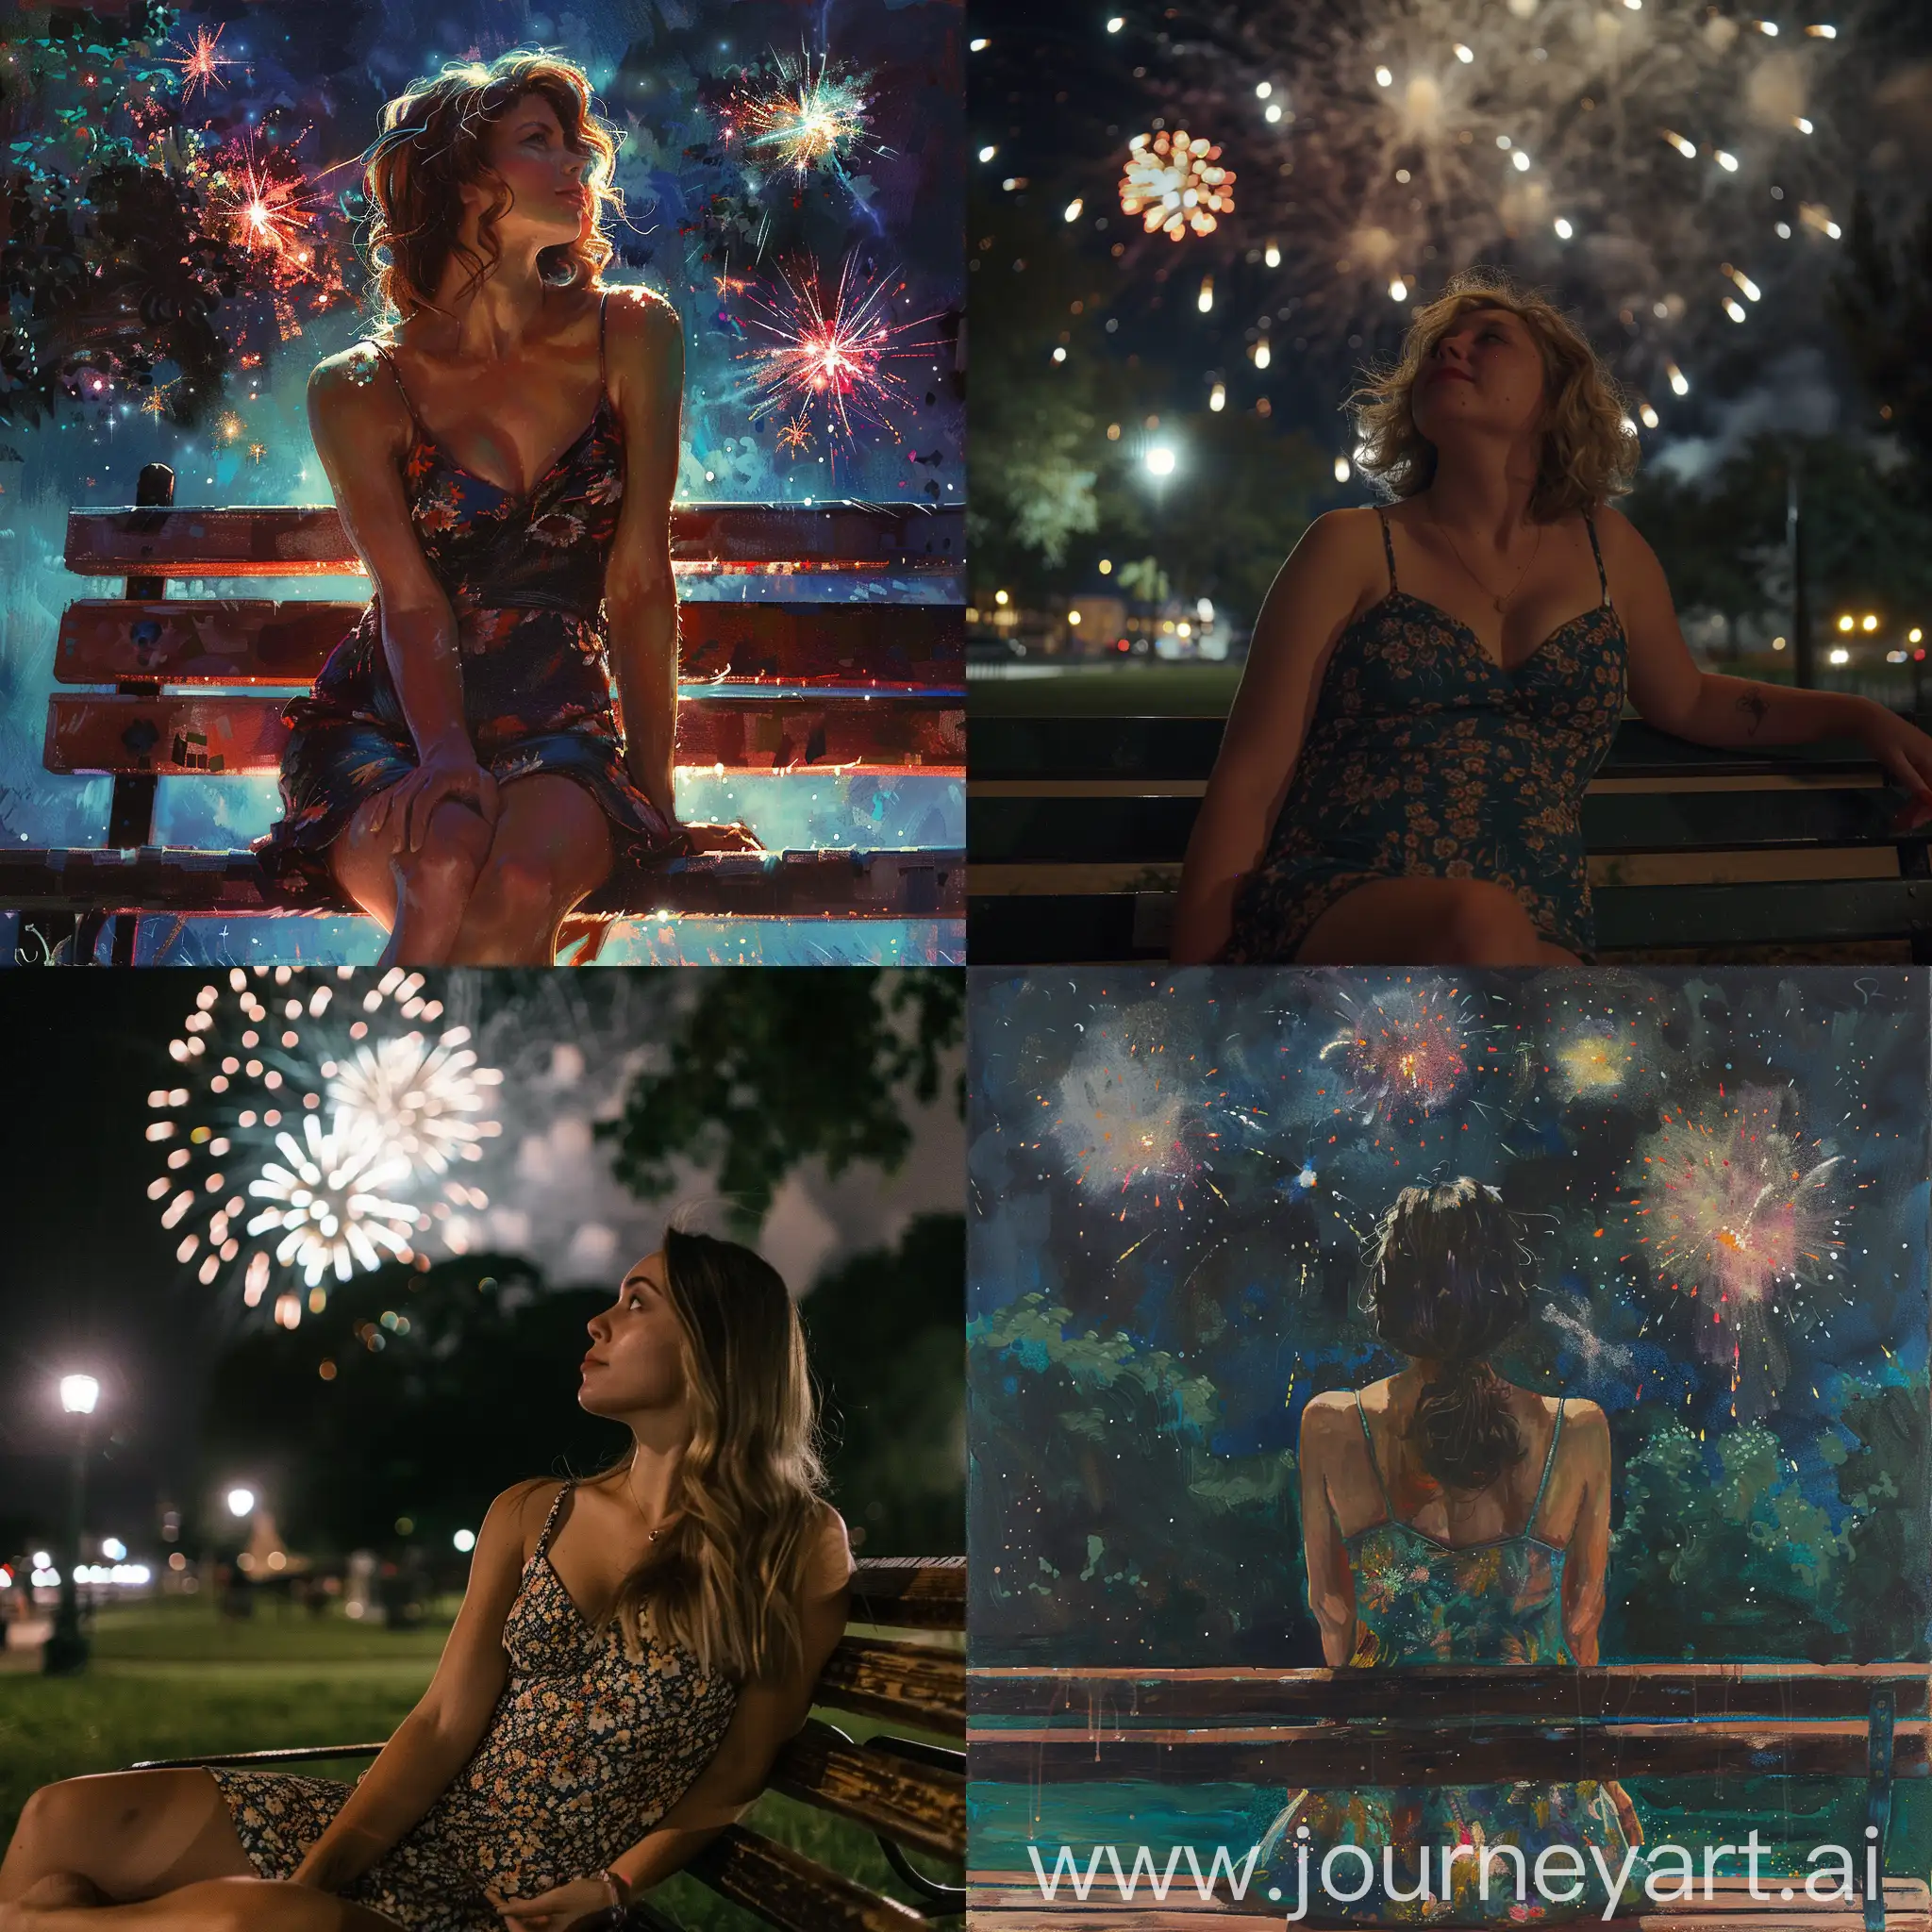 Woman-in-Sundress-Watching-Nighttime-Fireworks-on-Park-Bench